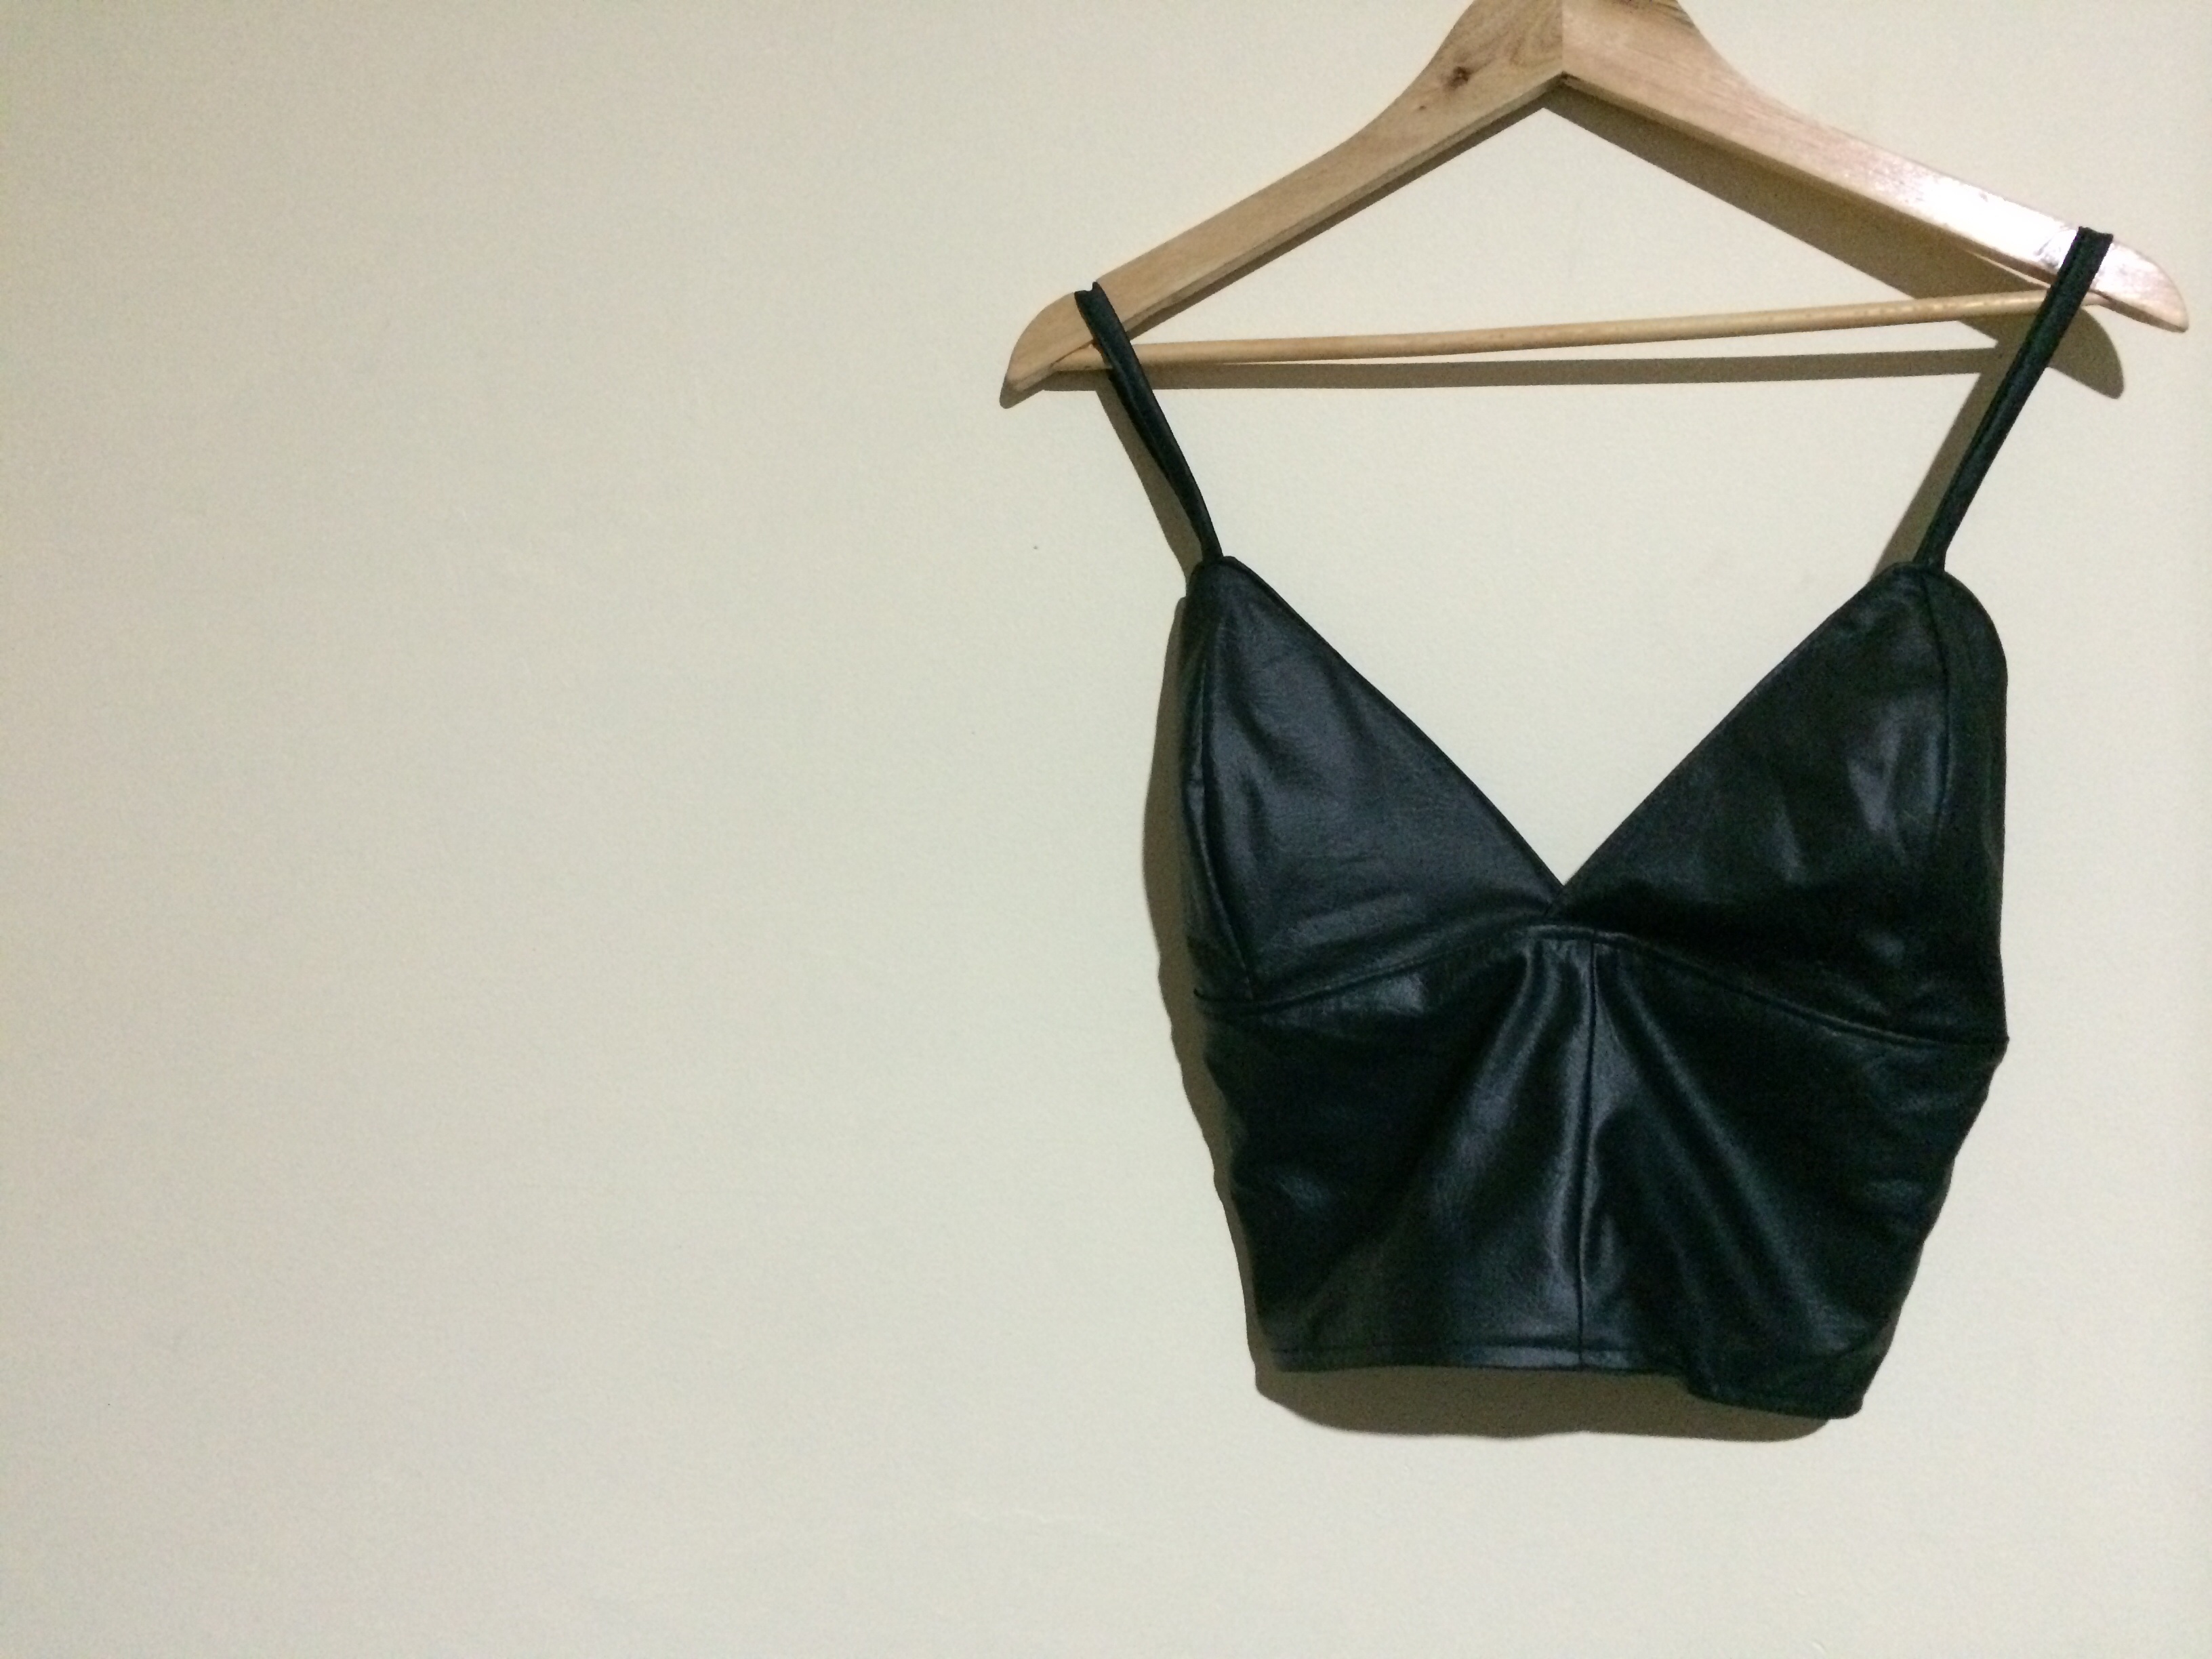 Bralette – Sewing Projects | BurdaStyle.com